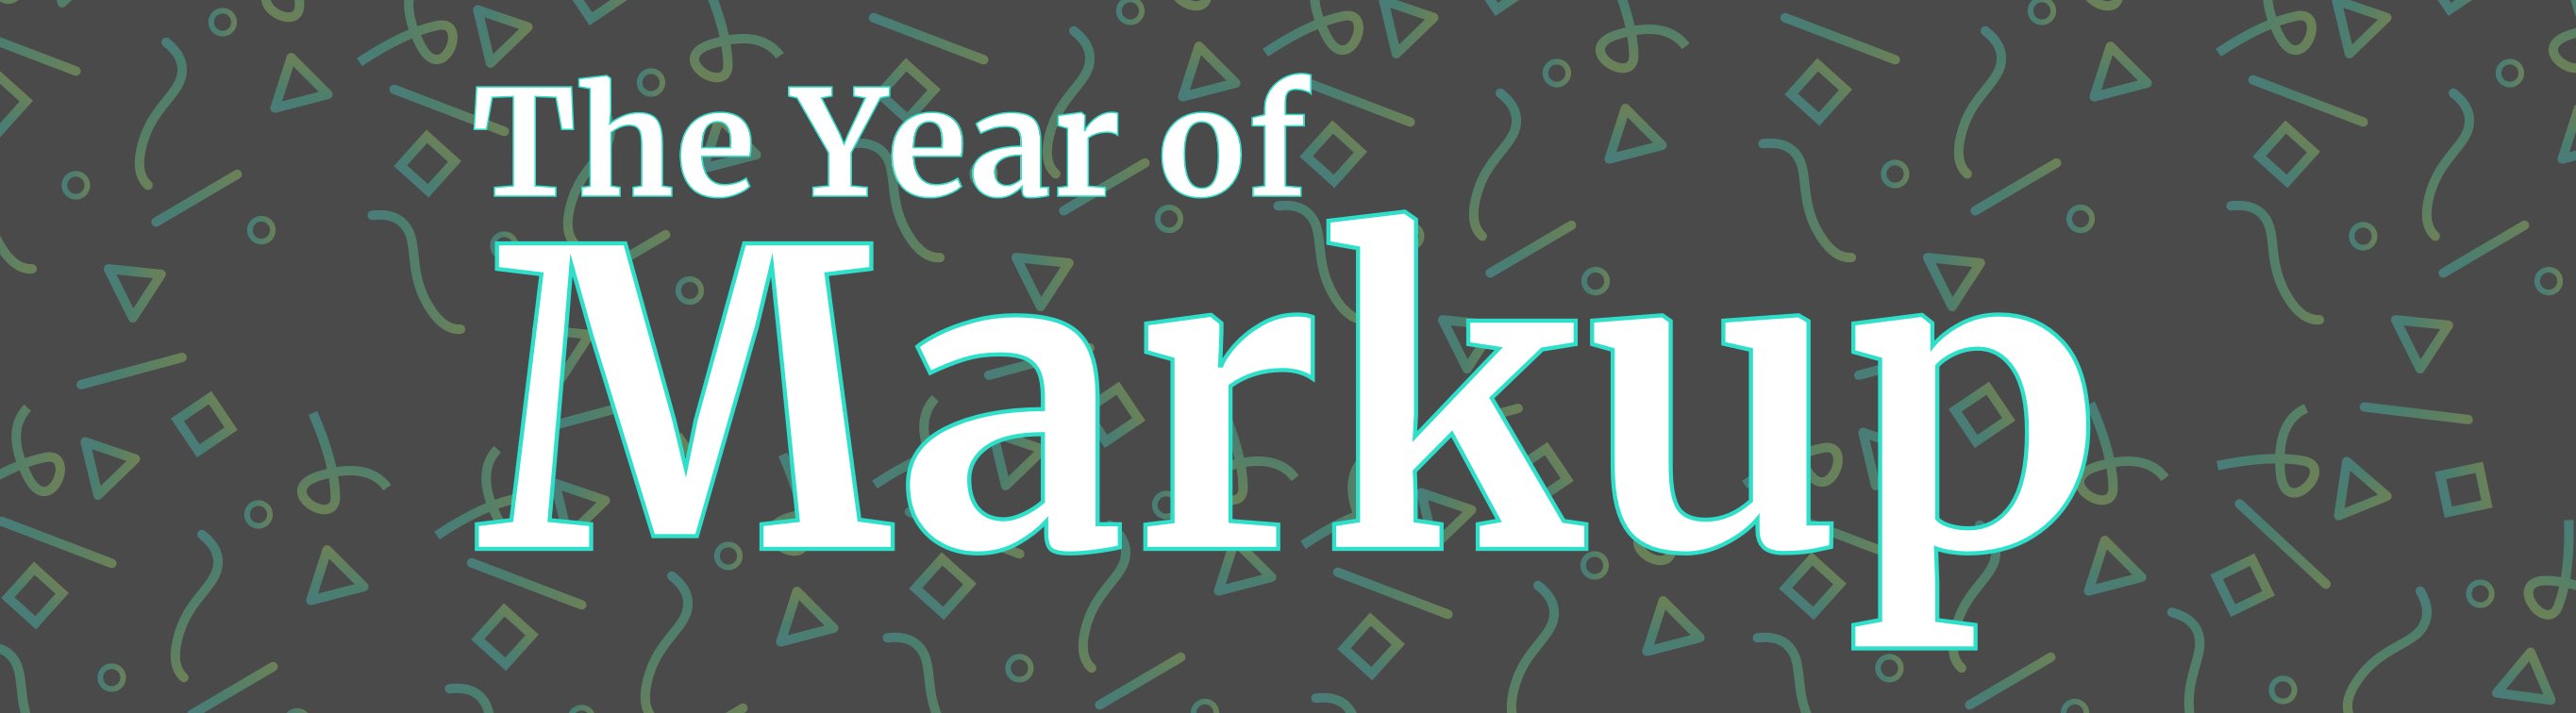 Year of Markup Graphic